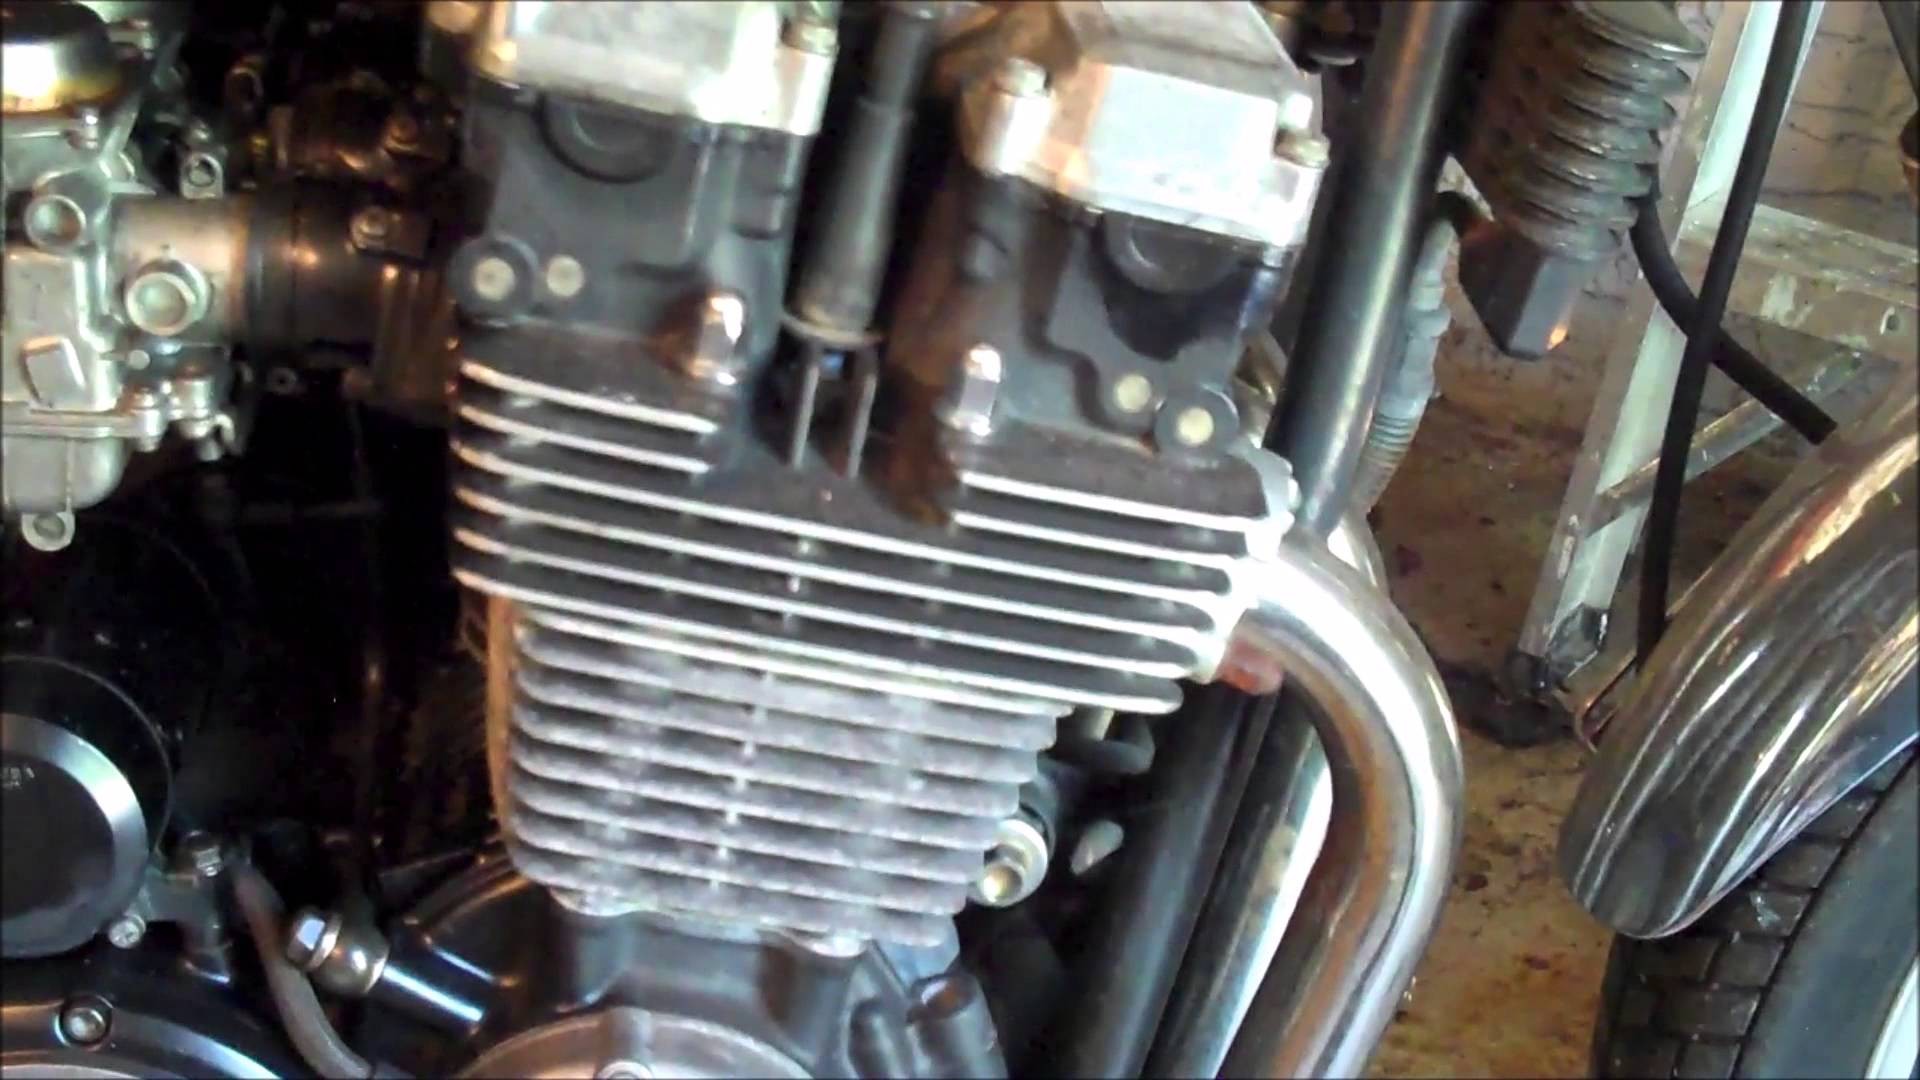 Motorcycle Cd70 Engine Diagram How to Identify and Repair Leaks On Your Motorcycle Of Motorcycle Cd70 Engine Diagram